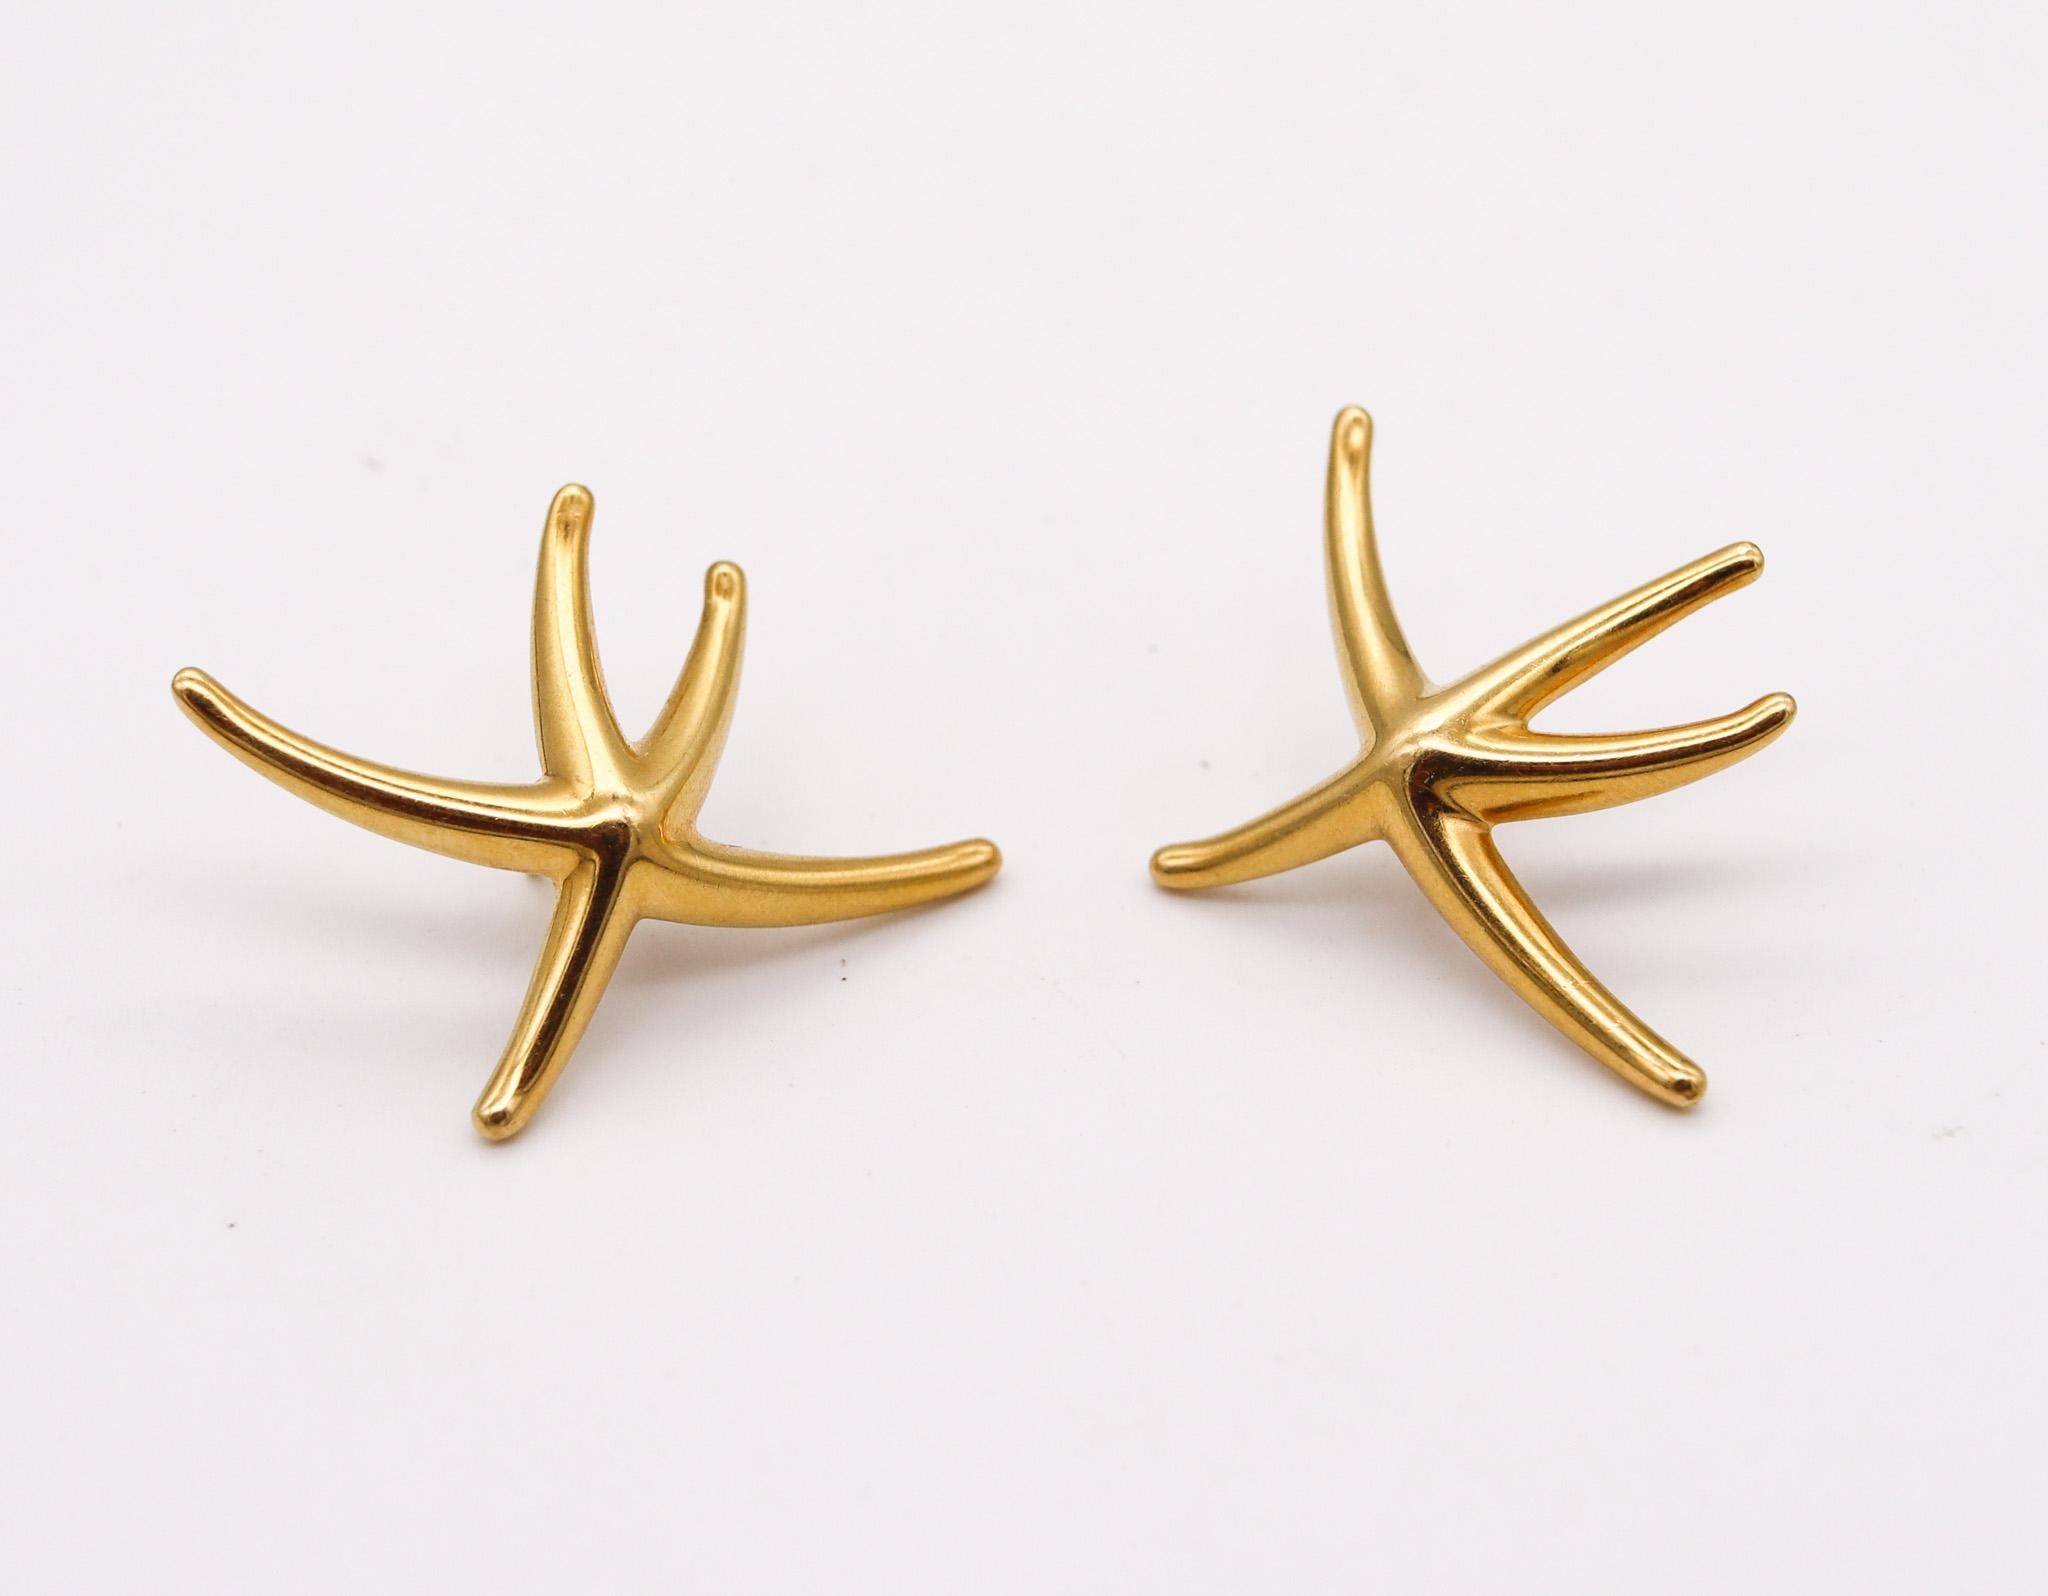 Tiffany Co. 1980 New York by Elsa Peretti Starfish Earrings in 18kt Yellow Gold 1